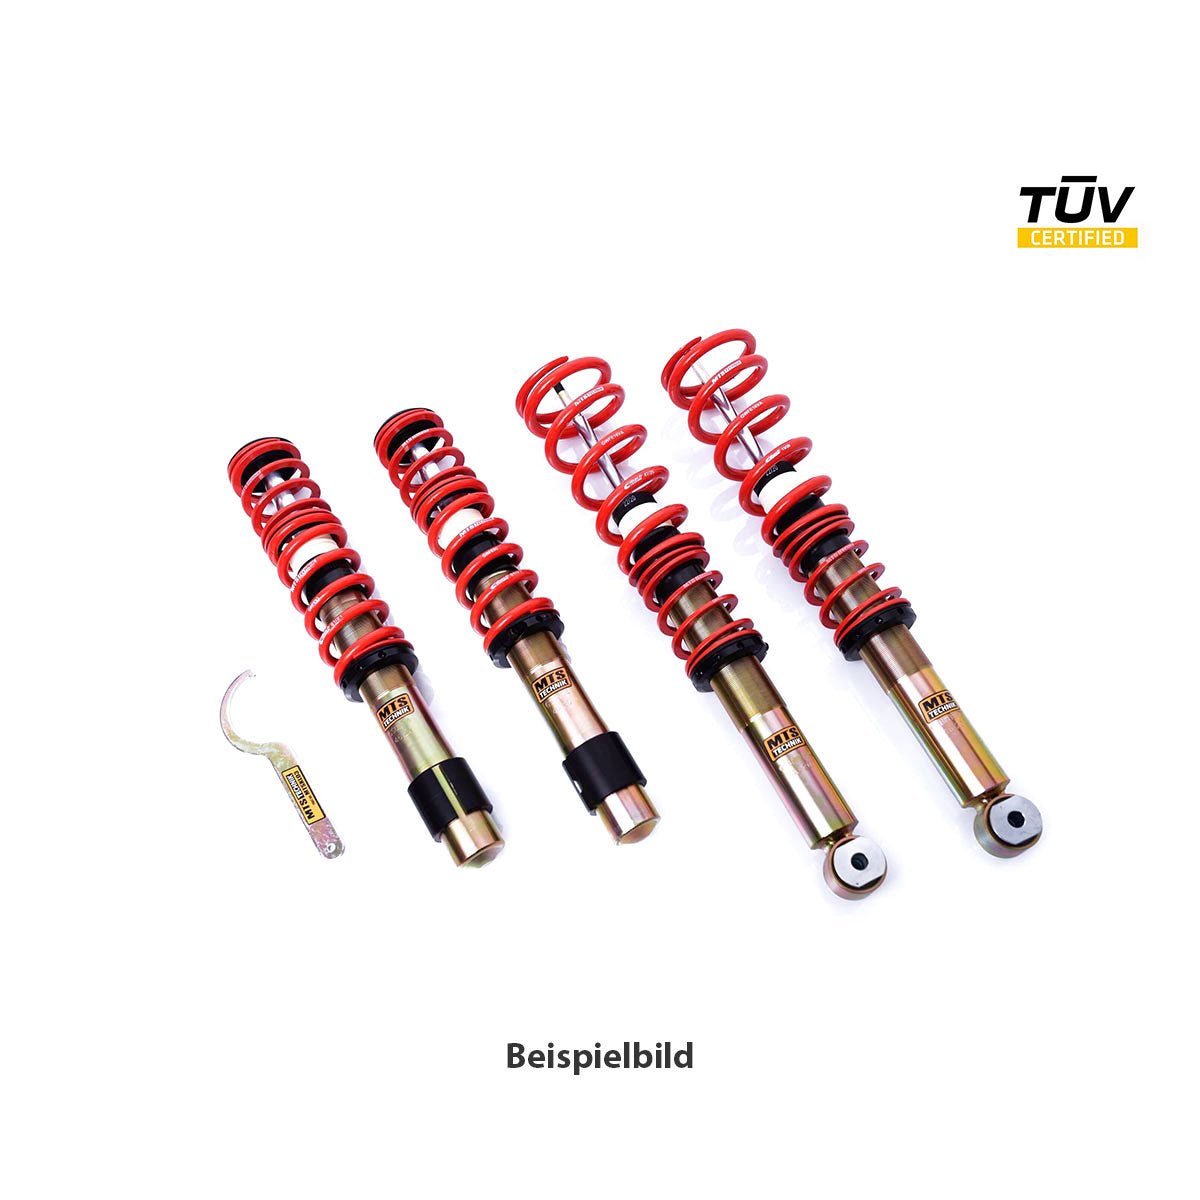 MTS TECHNIK Eibach coilover kit COMFORT Skoda Roomster (with TÜV) - PARTS33 GmbH